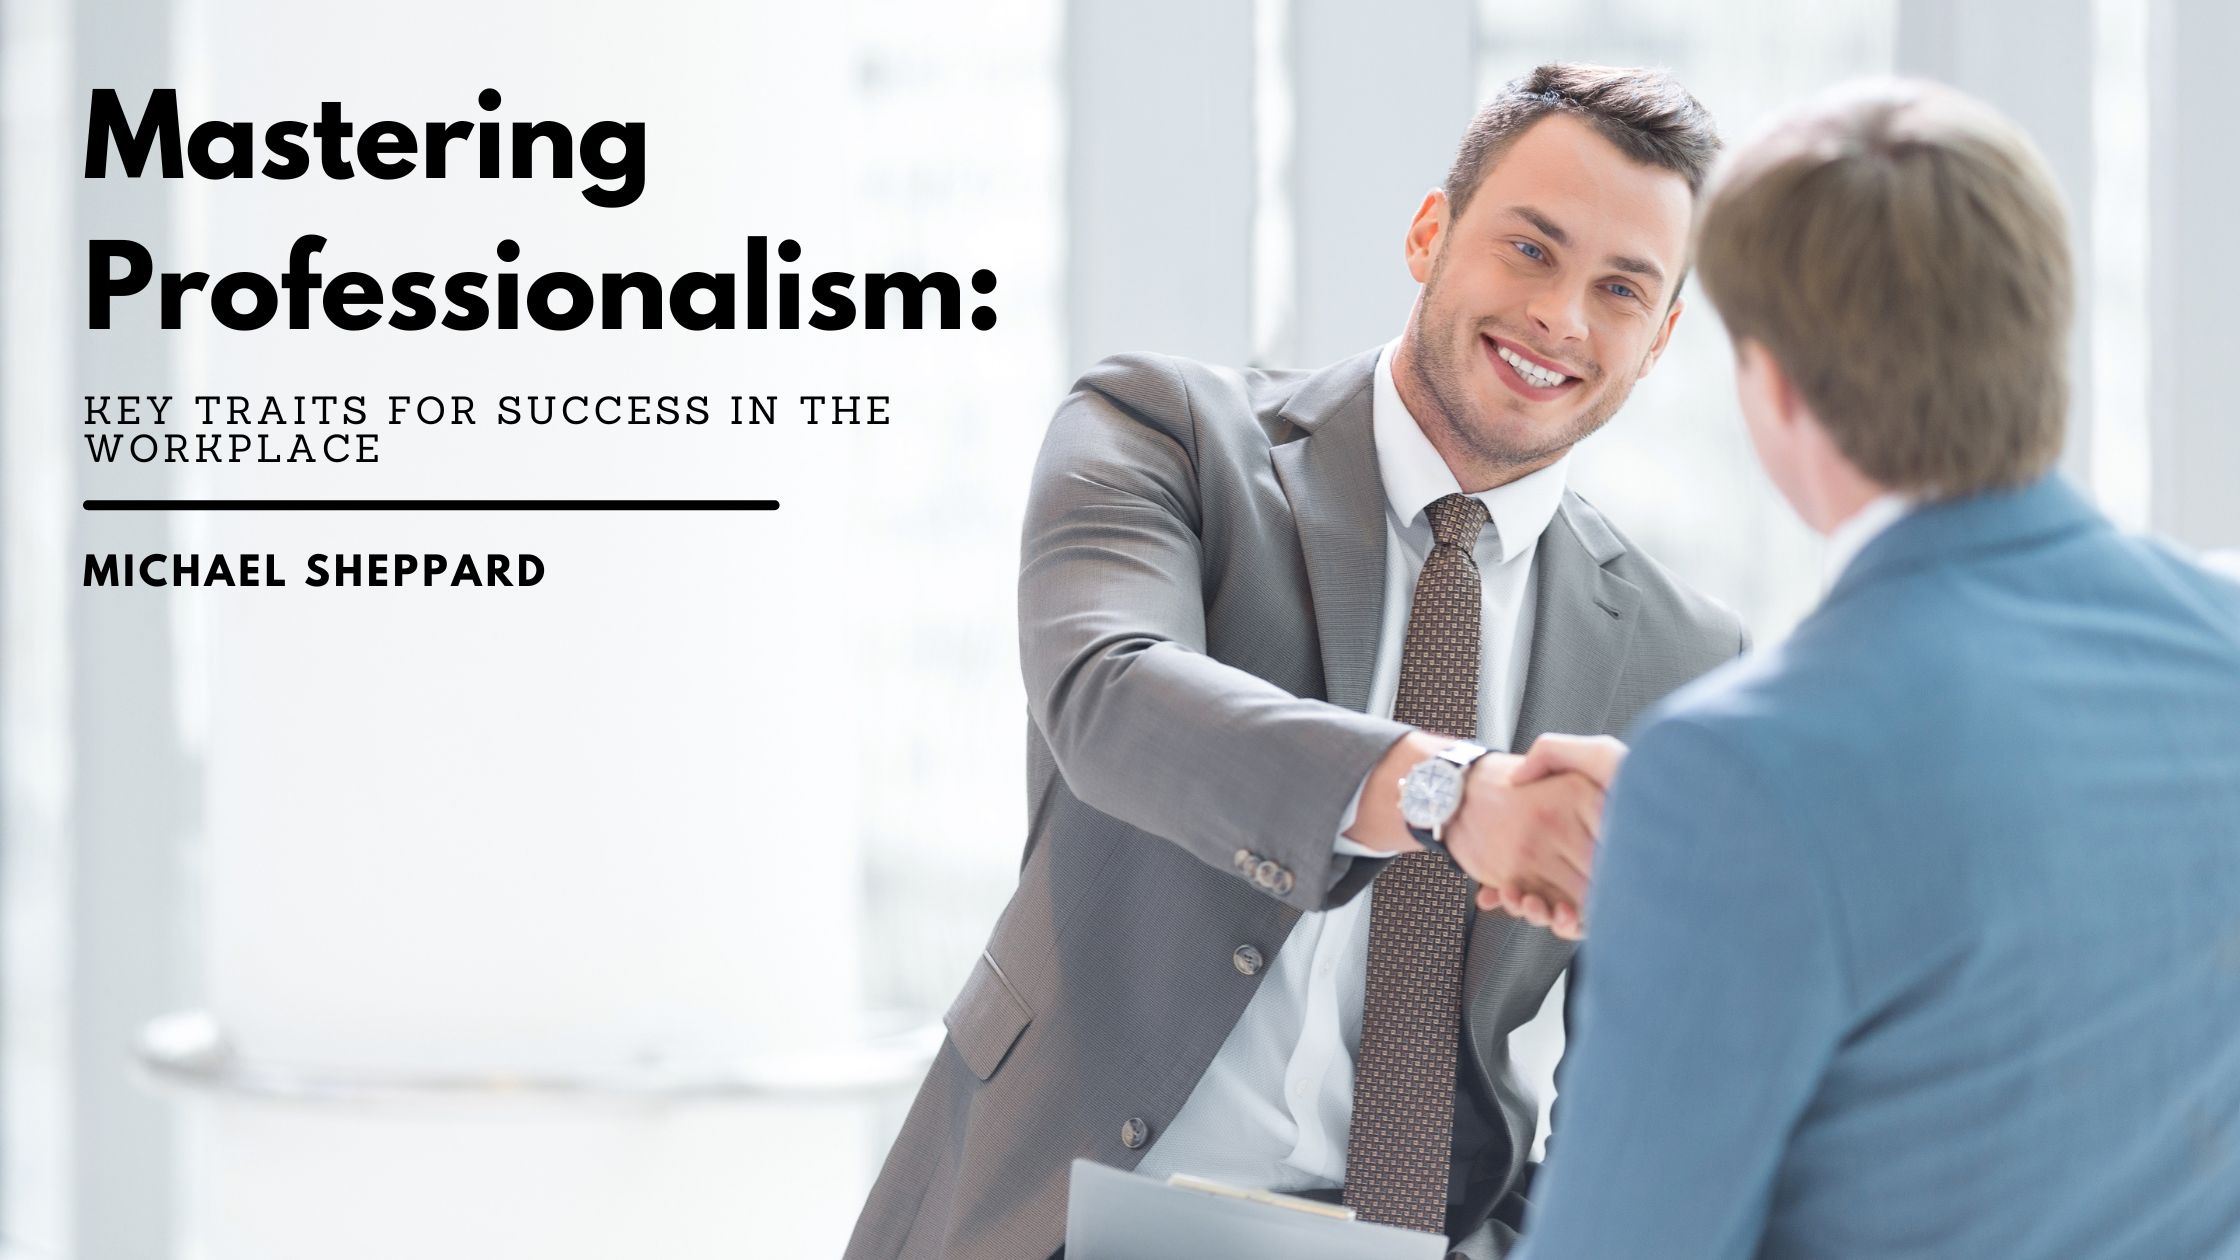 Mastering Professionalism: Key Traits for Success in the Workplace